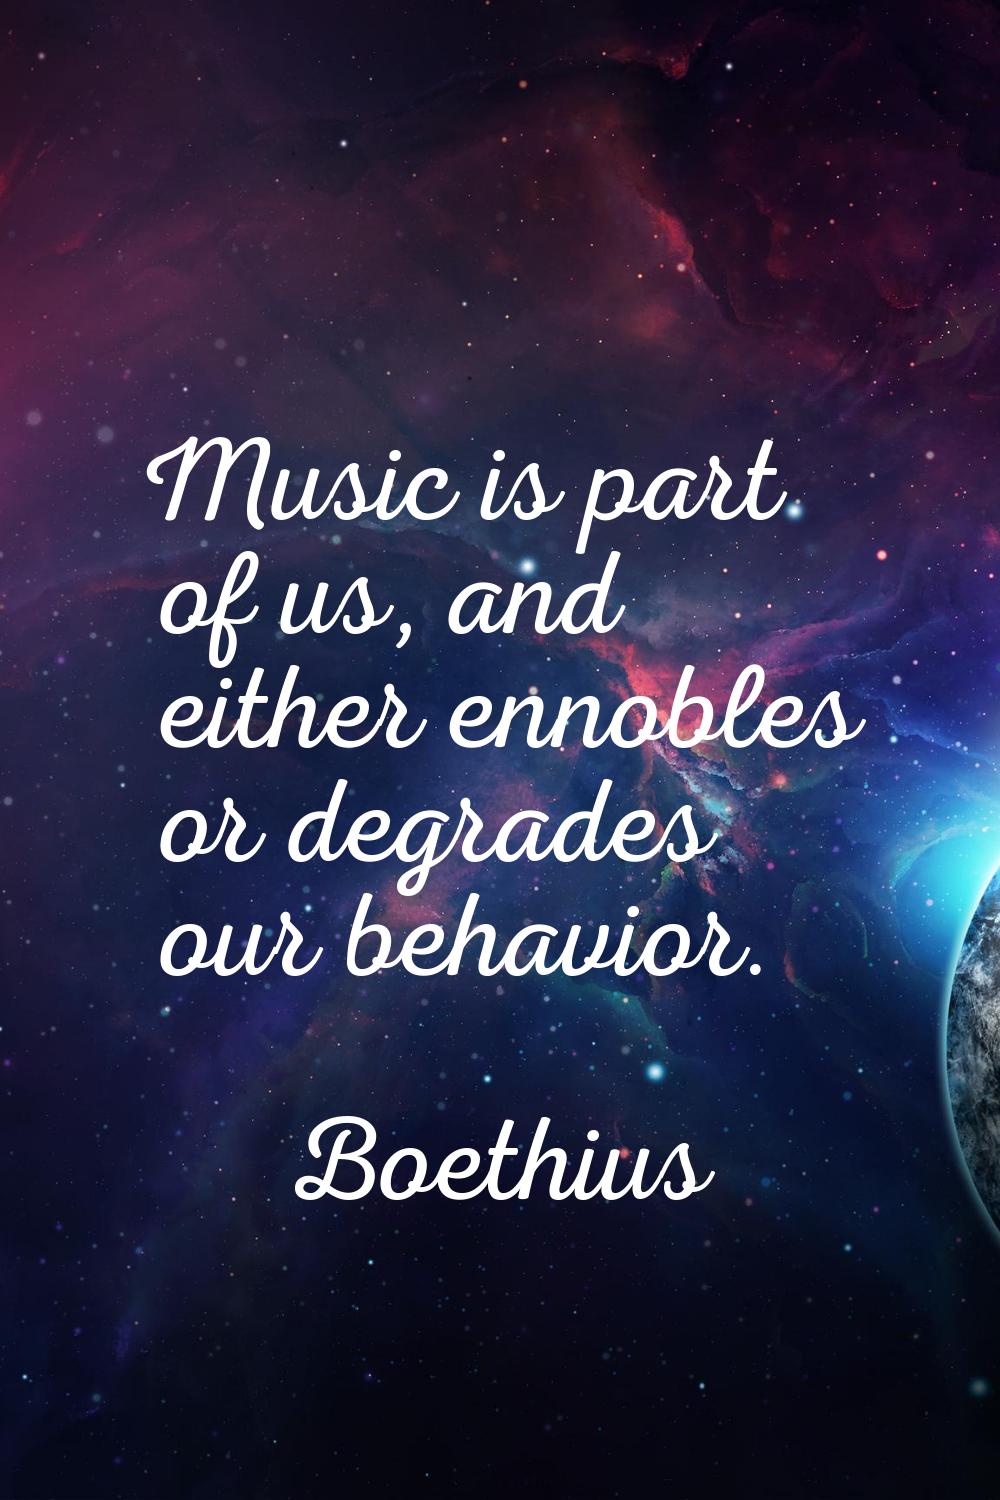 Music is part of us, and either ennobles or degrades our behavior.